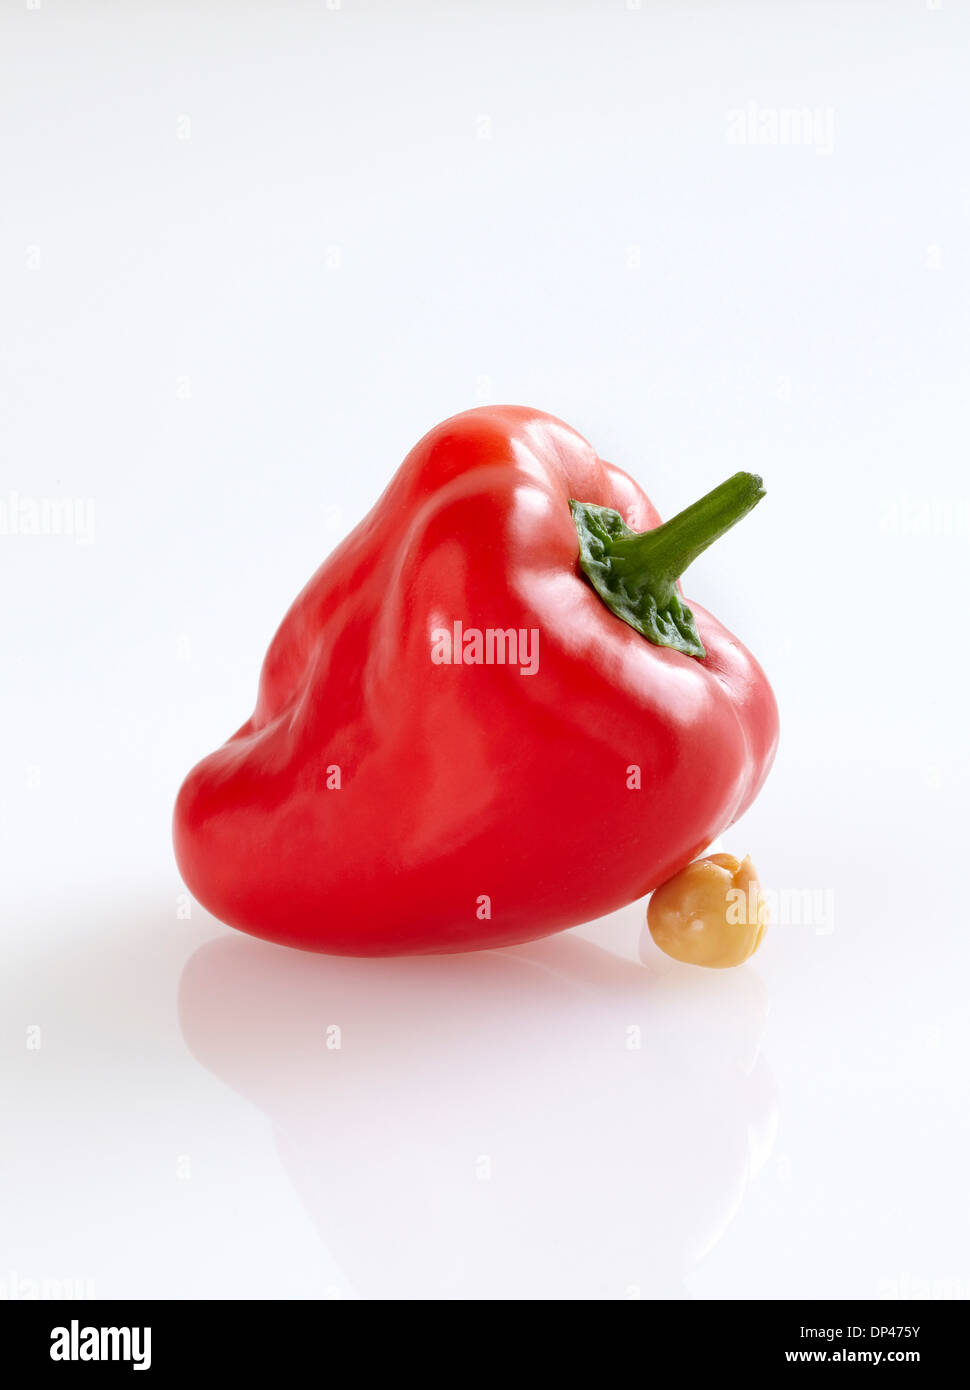 Fresh Red Pepper leaning on Cooked Chickpea, White Background, Studio Shot Stock Photo